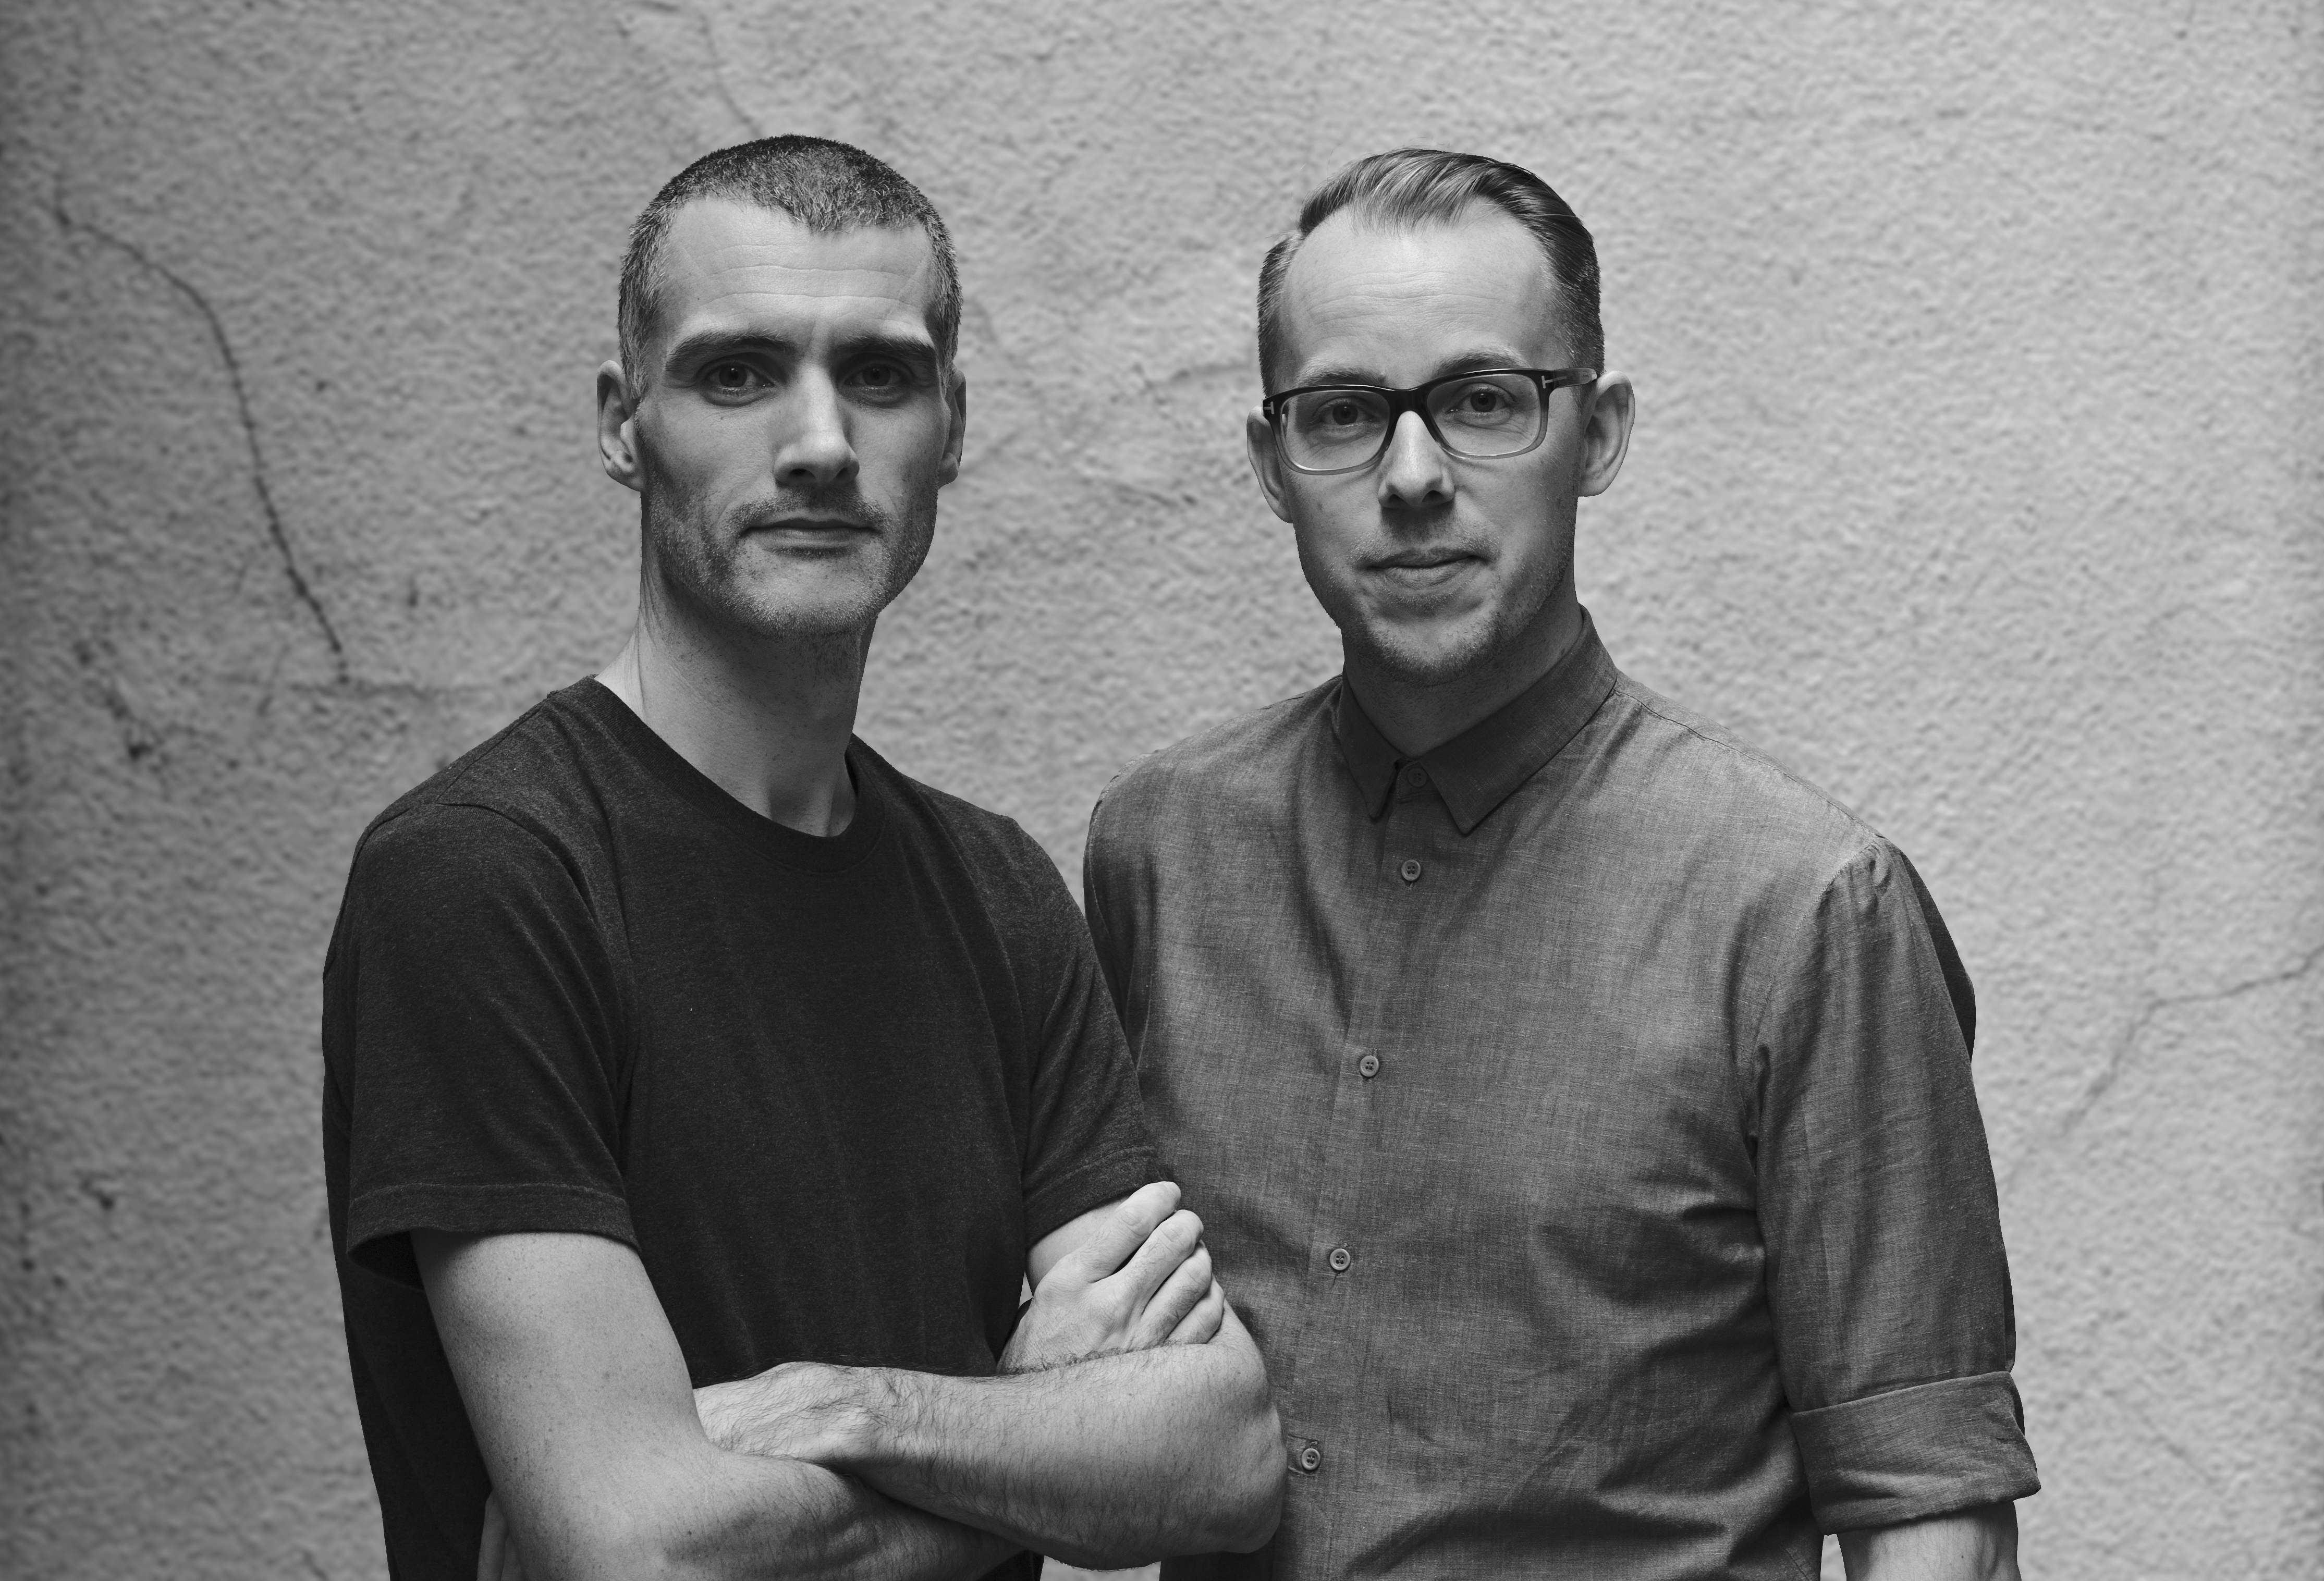 Nicol Boyd and Tomas Rosén, founders of Office for Product Design, talk about the importance of fixing things that are broken